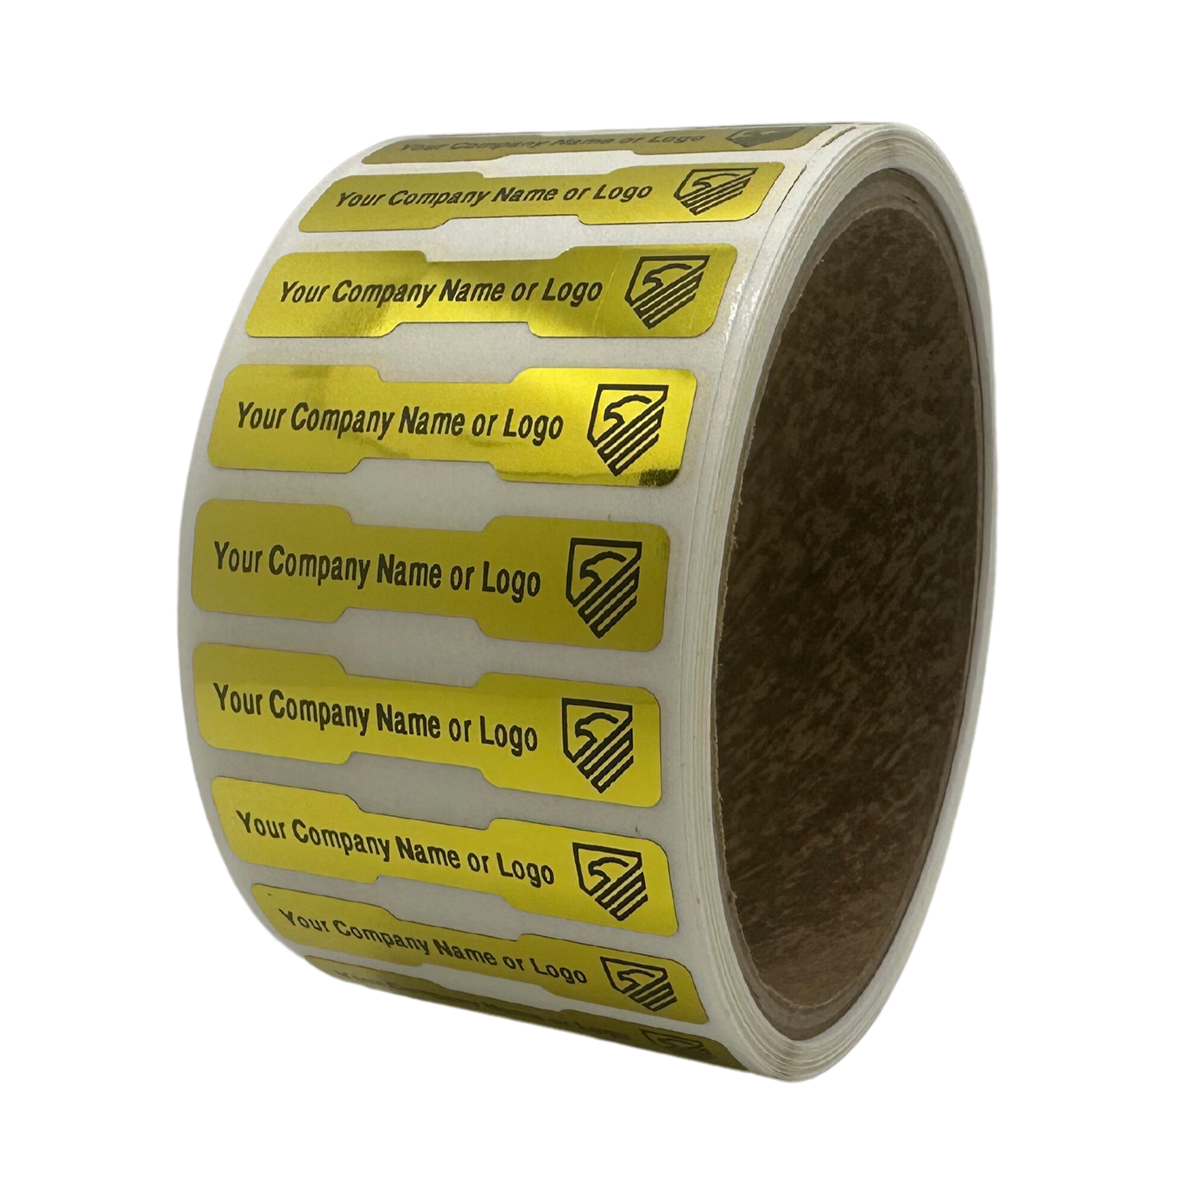 10,000 Tamper Evident Security Labels Gold TamperVoidPro Seal Sticker, Dogbone Shape Size 1.75" x 0.375 (44mm x 9mm). Custom Printed. >Click on item details to customize.